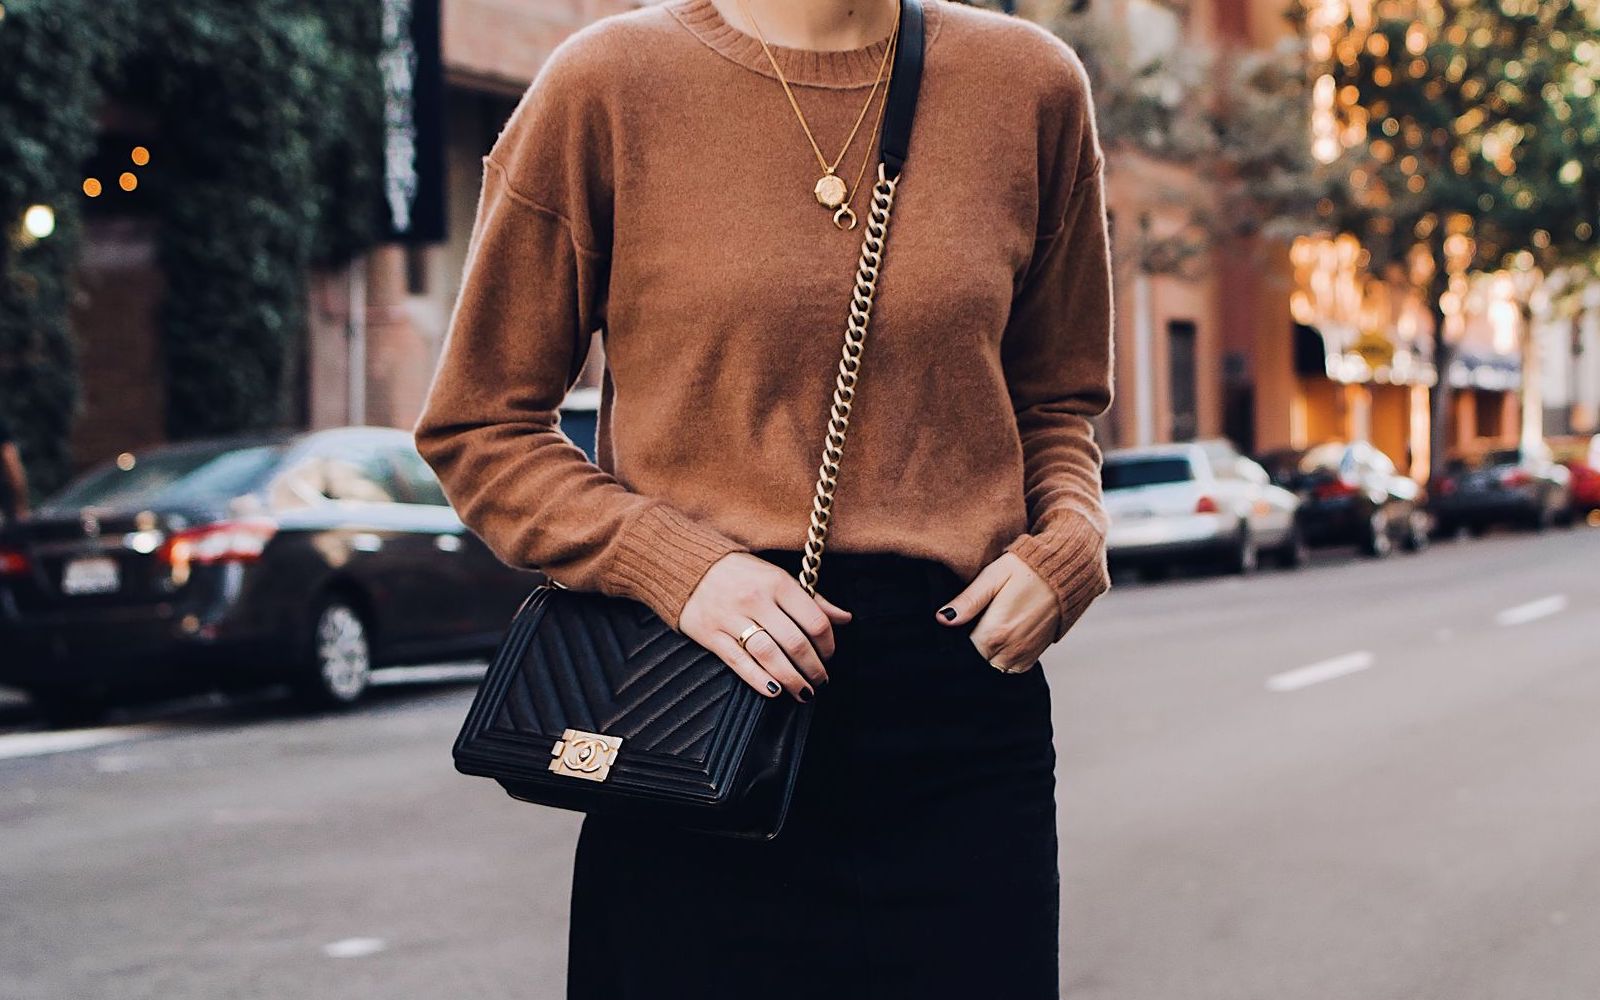 Put Together an All-Black Outfit and We’ll Reveal How Dark Your Soul Is woman wearing black bag